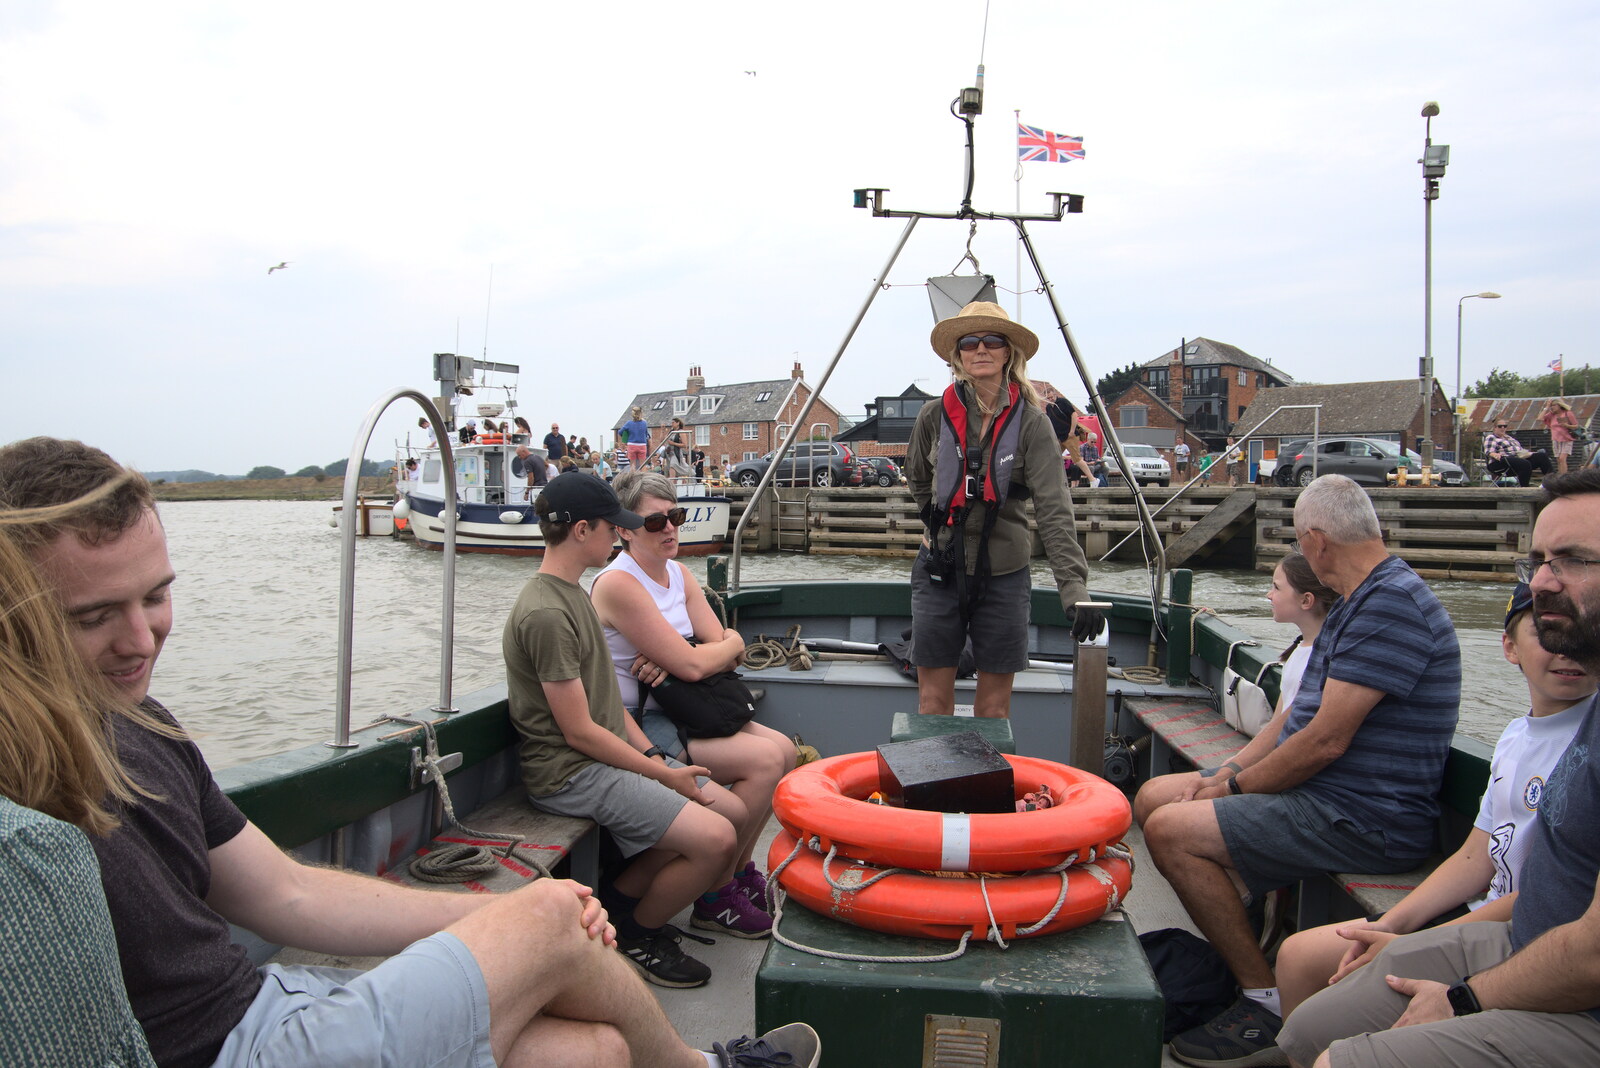 We head off to Orford Ness from A Trip to Orford Ness, Orford, Suffolk - 16th August 2022